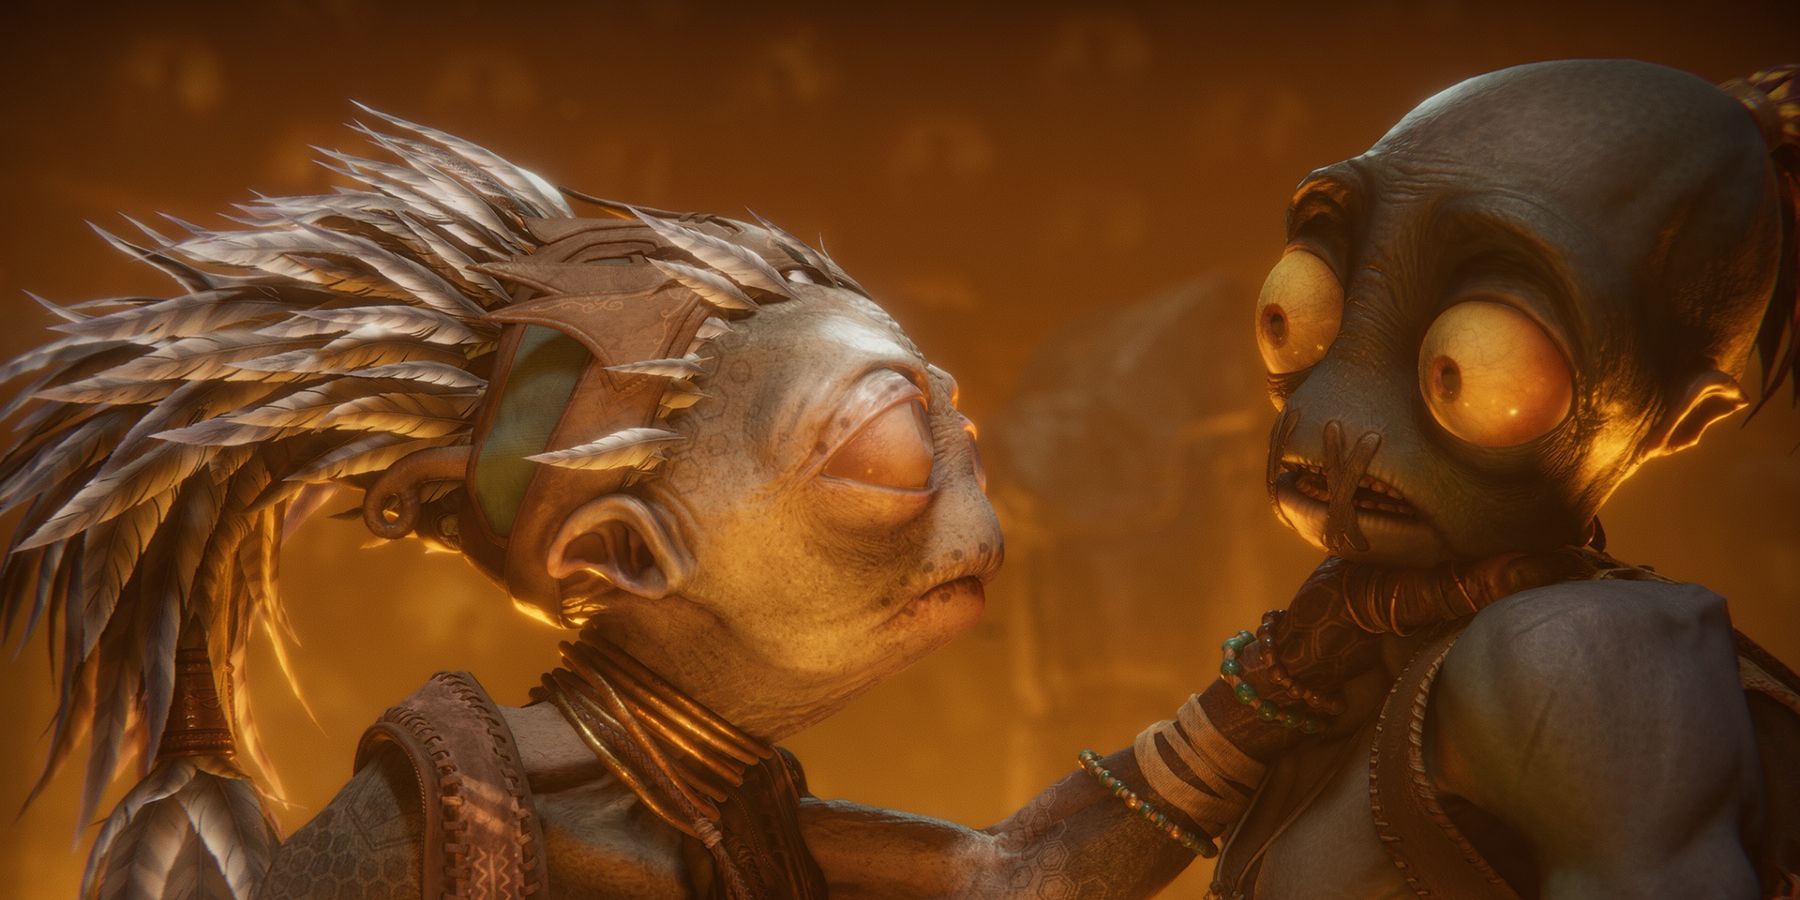 One creature strangles another in Oddworld Soulstorm